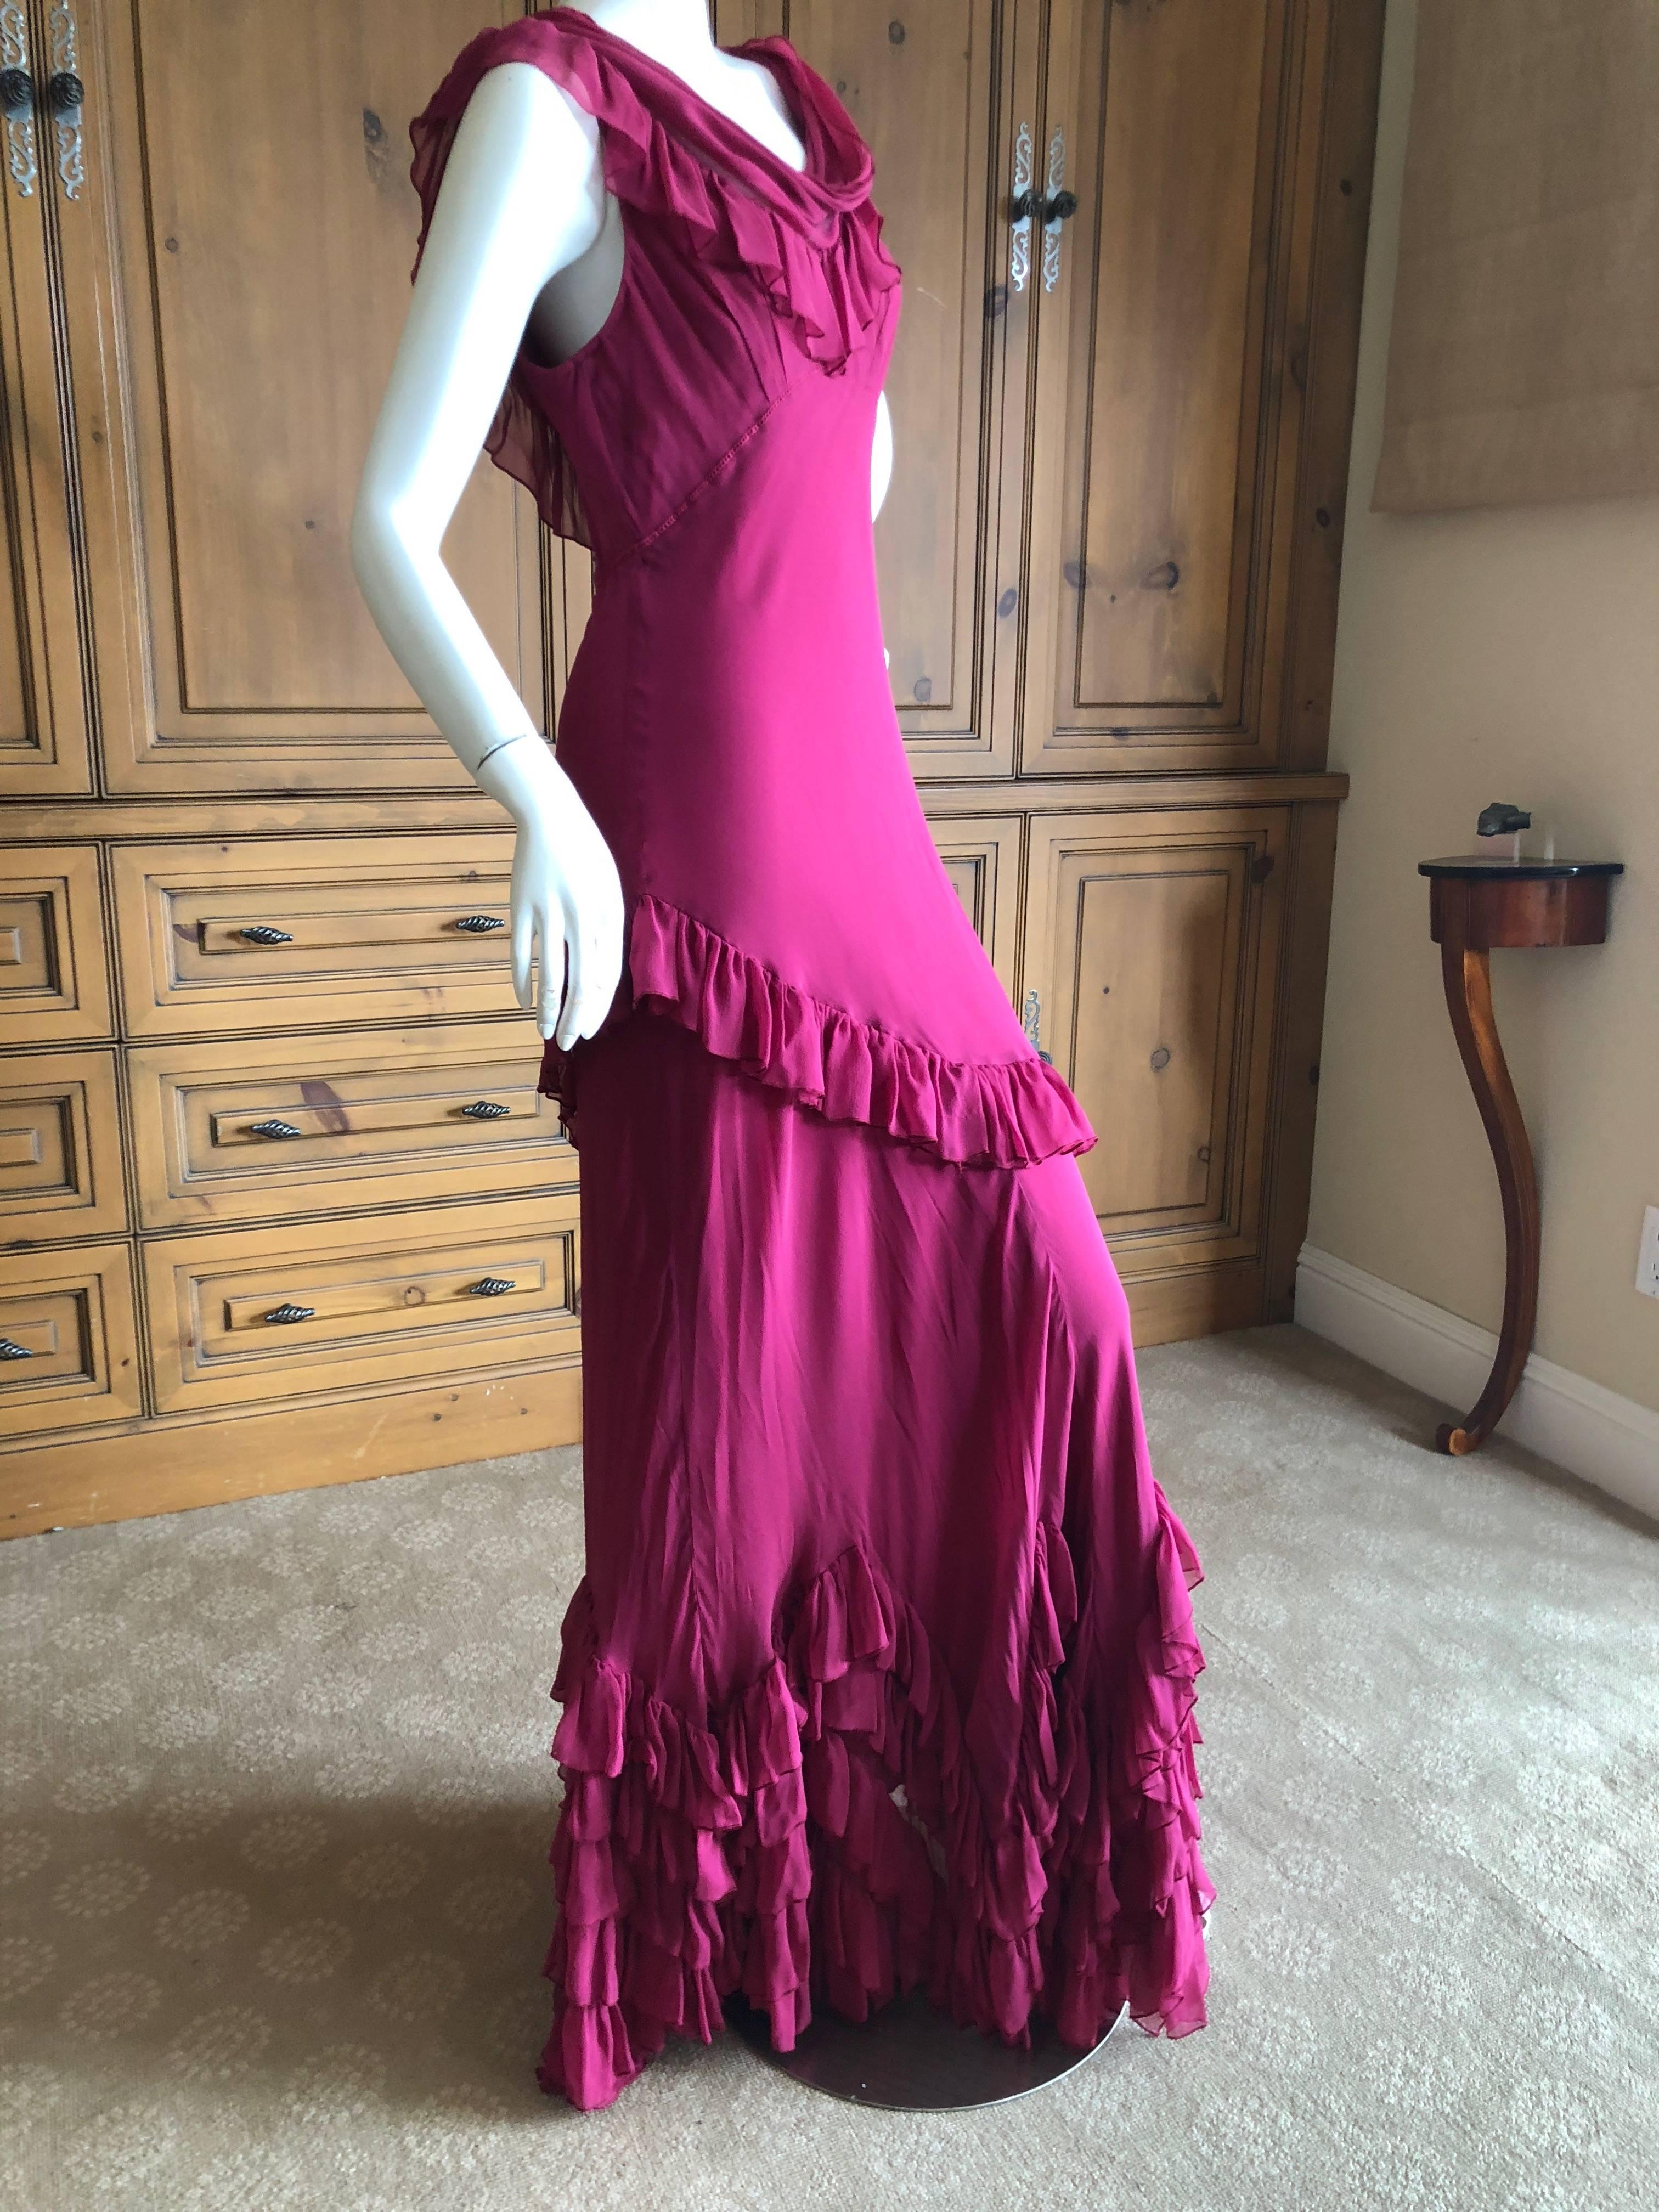 John Galliano Raspberry Sheer Vintage Silk Ruffled Evening Dress with Cowl Back  In New Condition For Sale In Cloverdale, CA